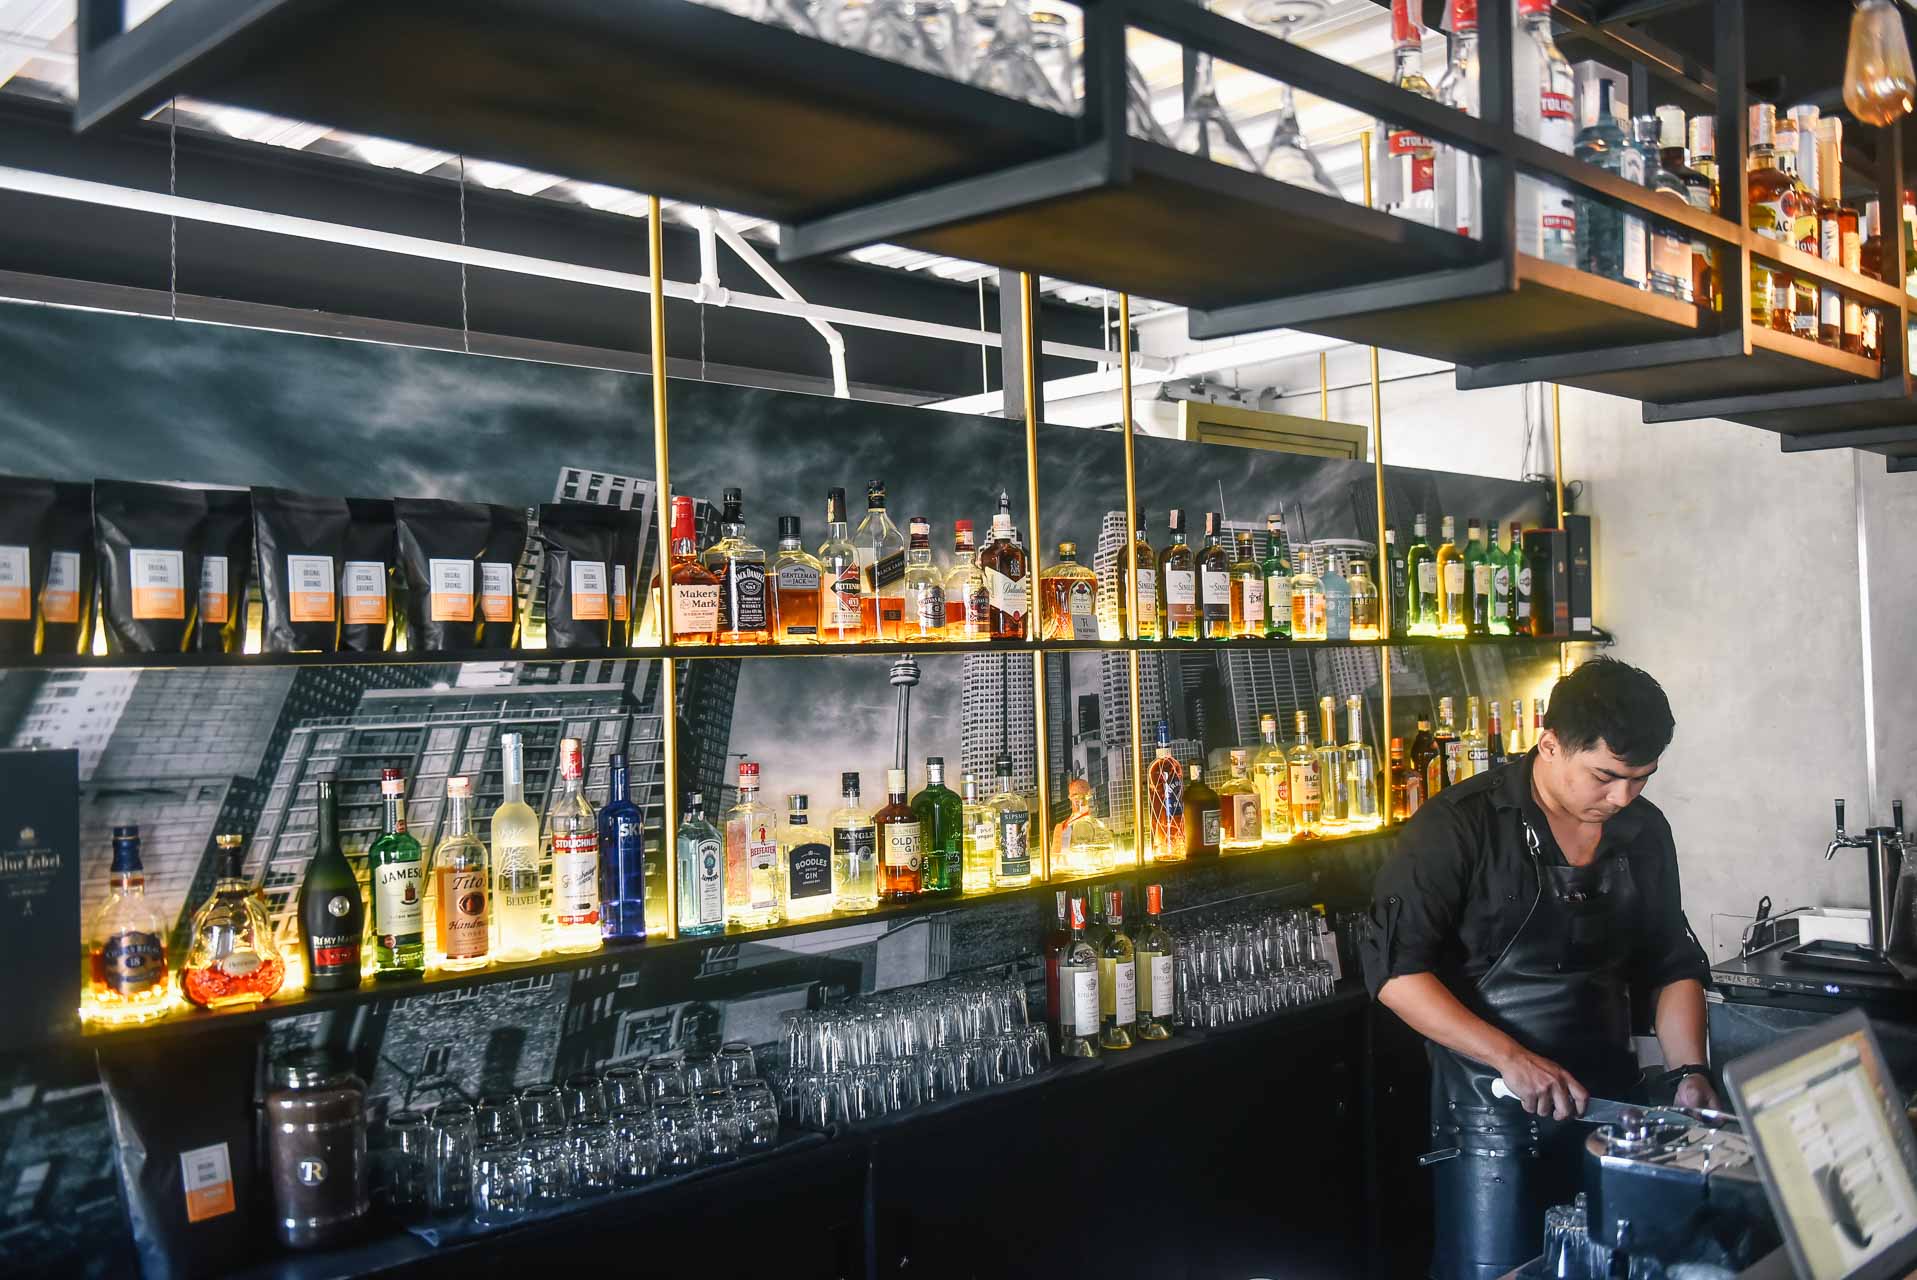 Your Guide to the Best Barbershops that Serve Sharp Haircuts and Booze!